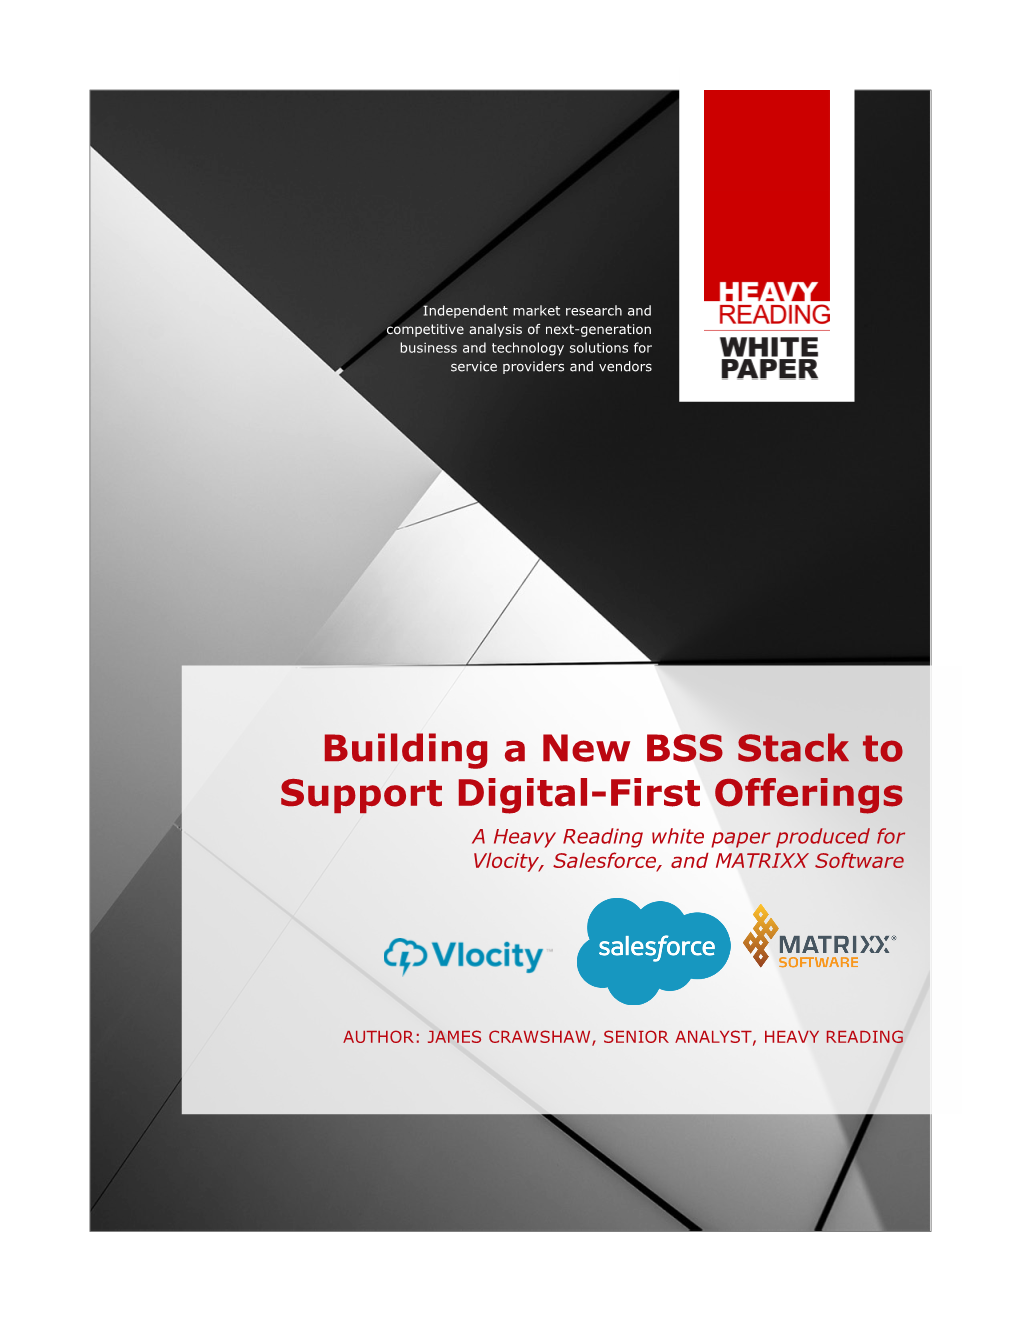 Building a New BSS Stack to Support Digital-First Offerings a Heavy Reading White Paper Produced for Vlocity, Salesforce, and MATRIXX Software